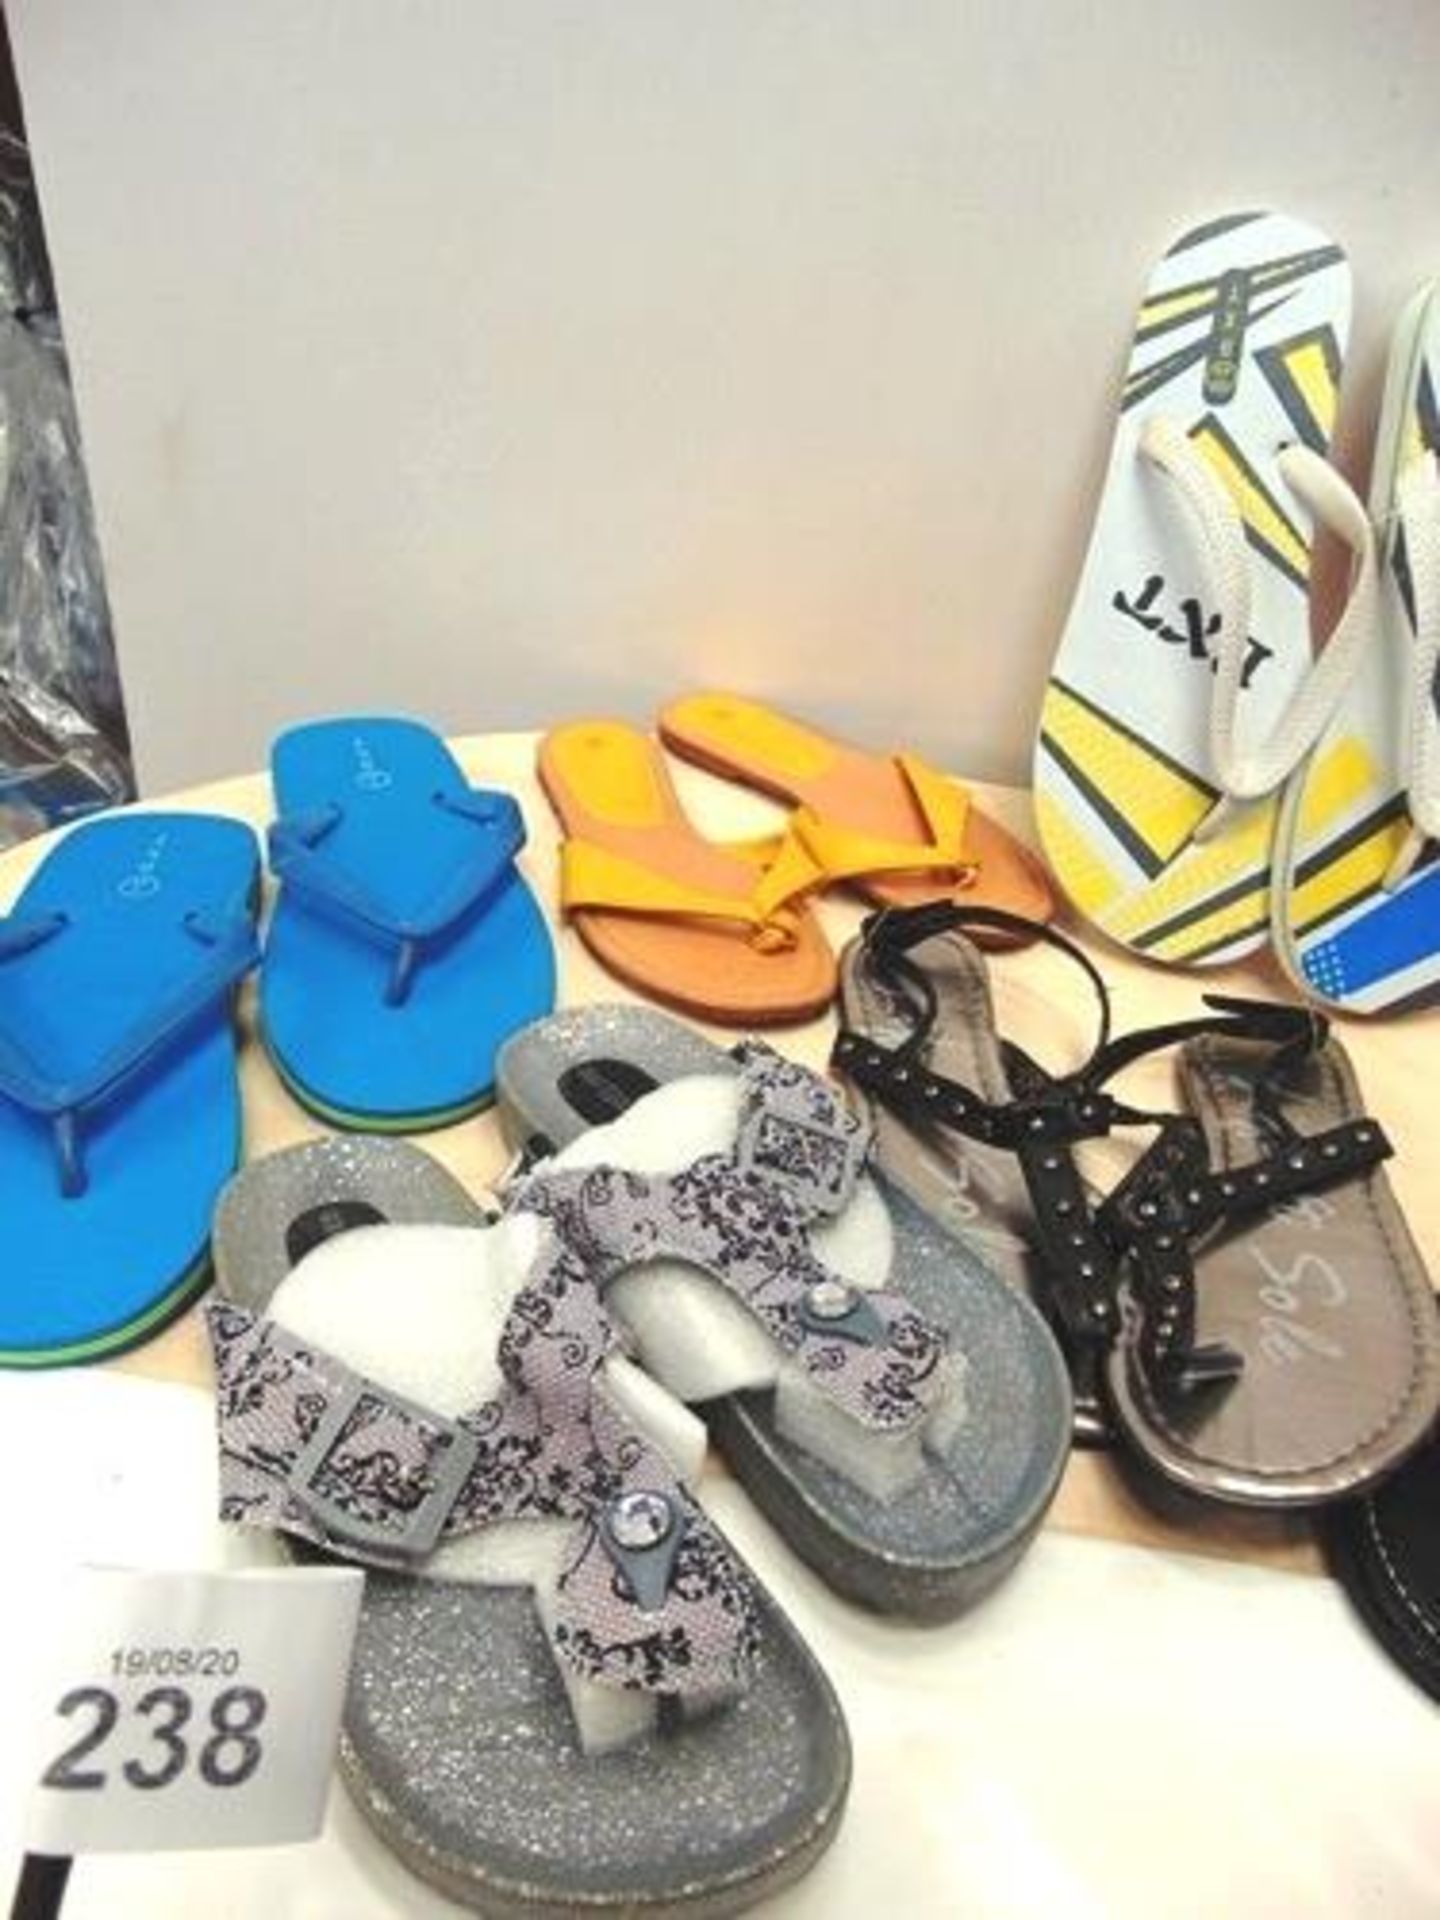 Approximately 30 x assorted pairs of men's, women's and children's footwear including flip-flops, - Image 4 of 4